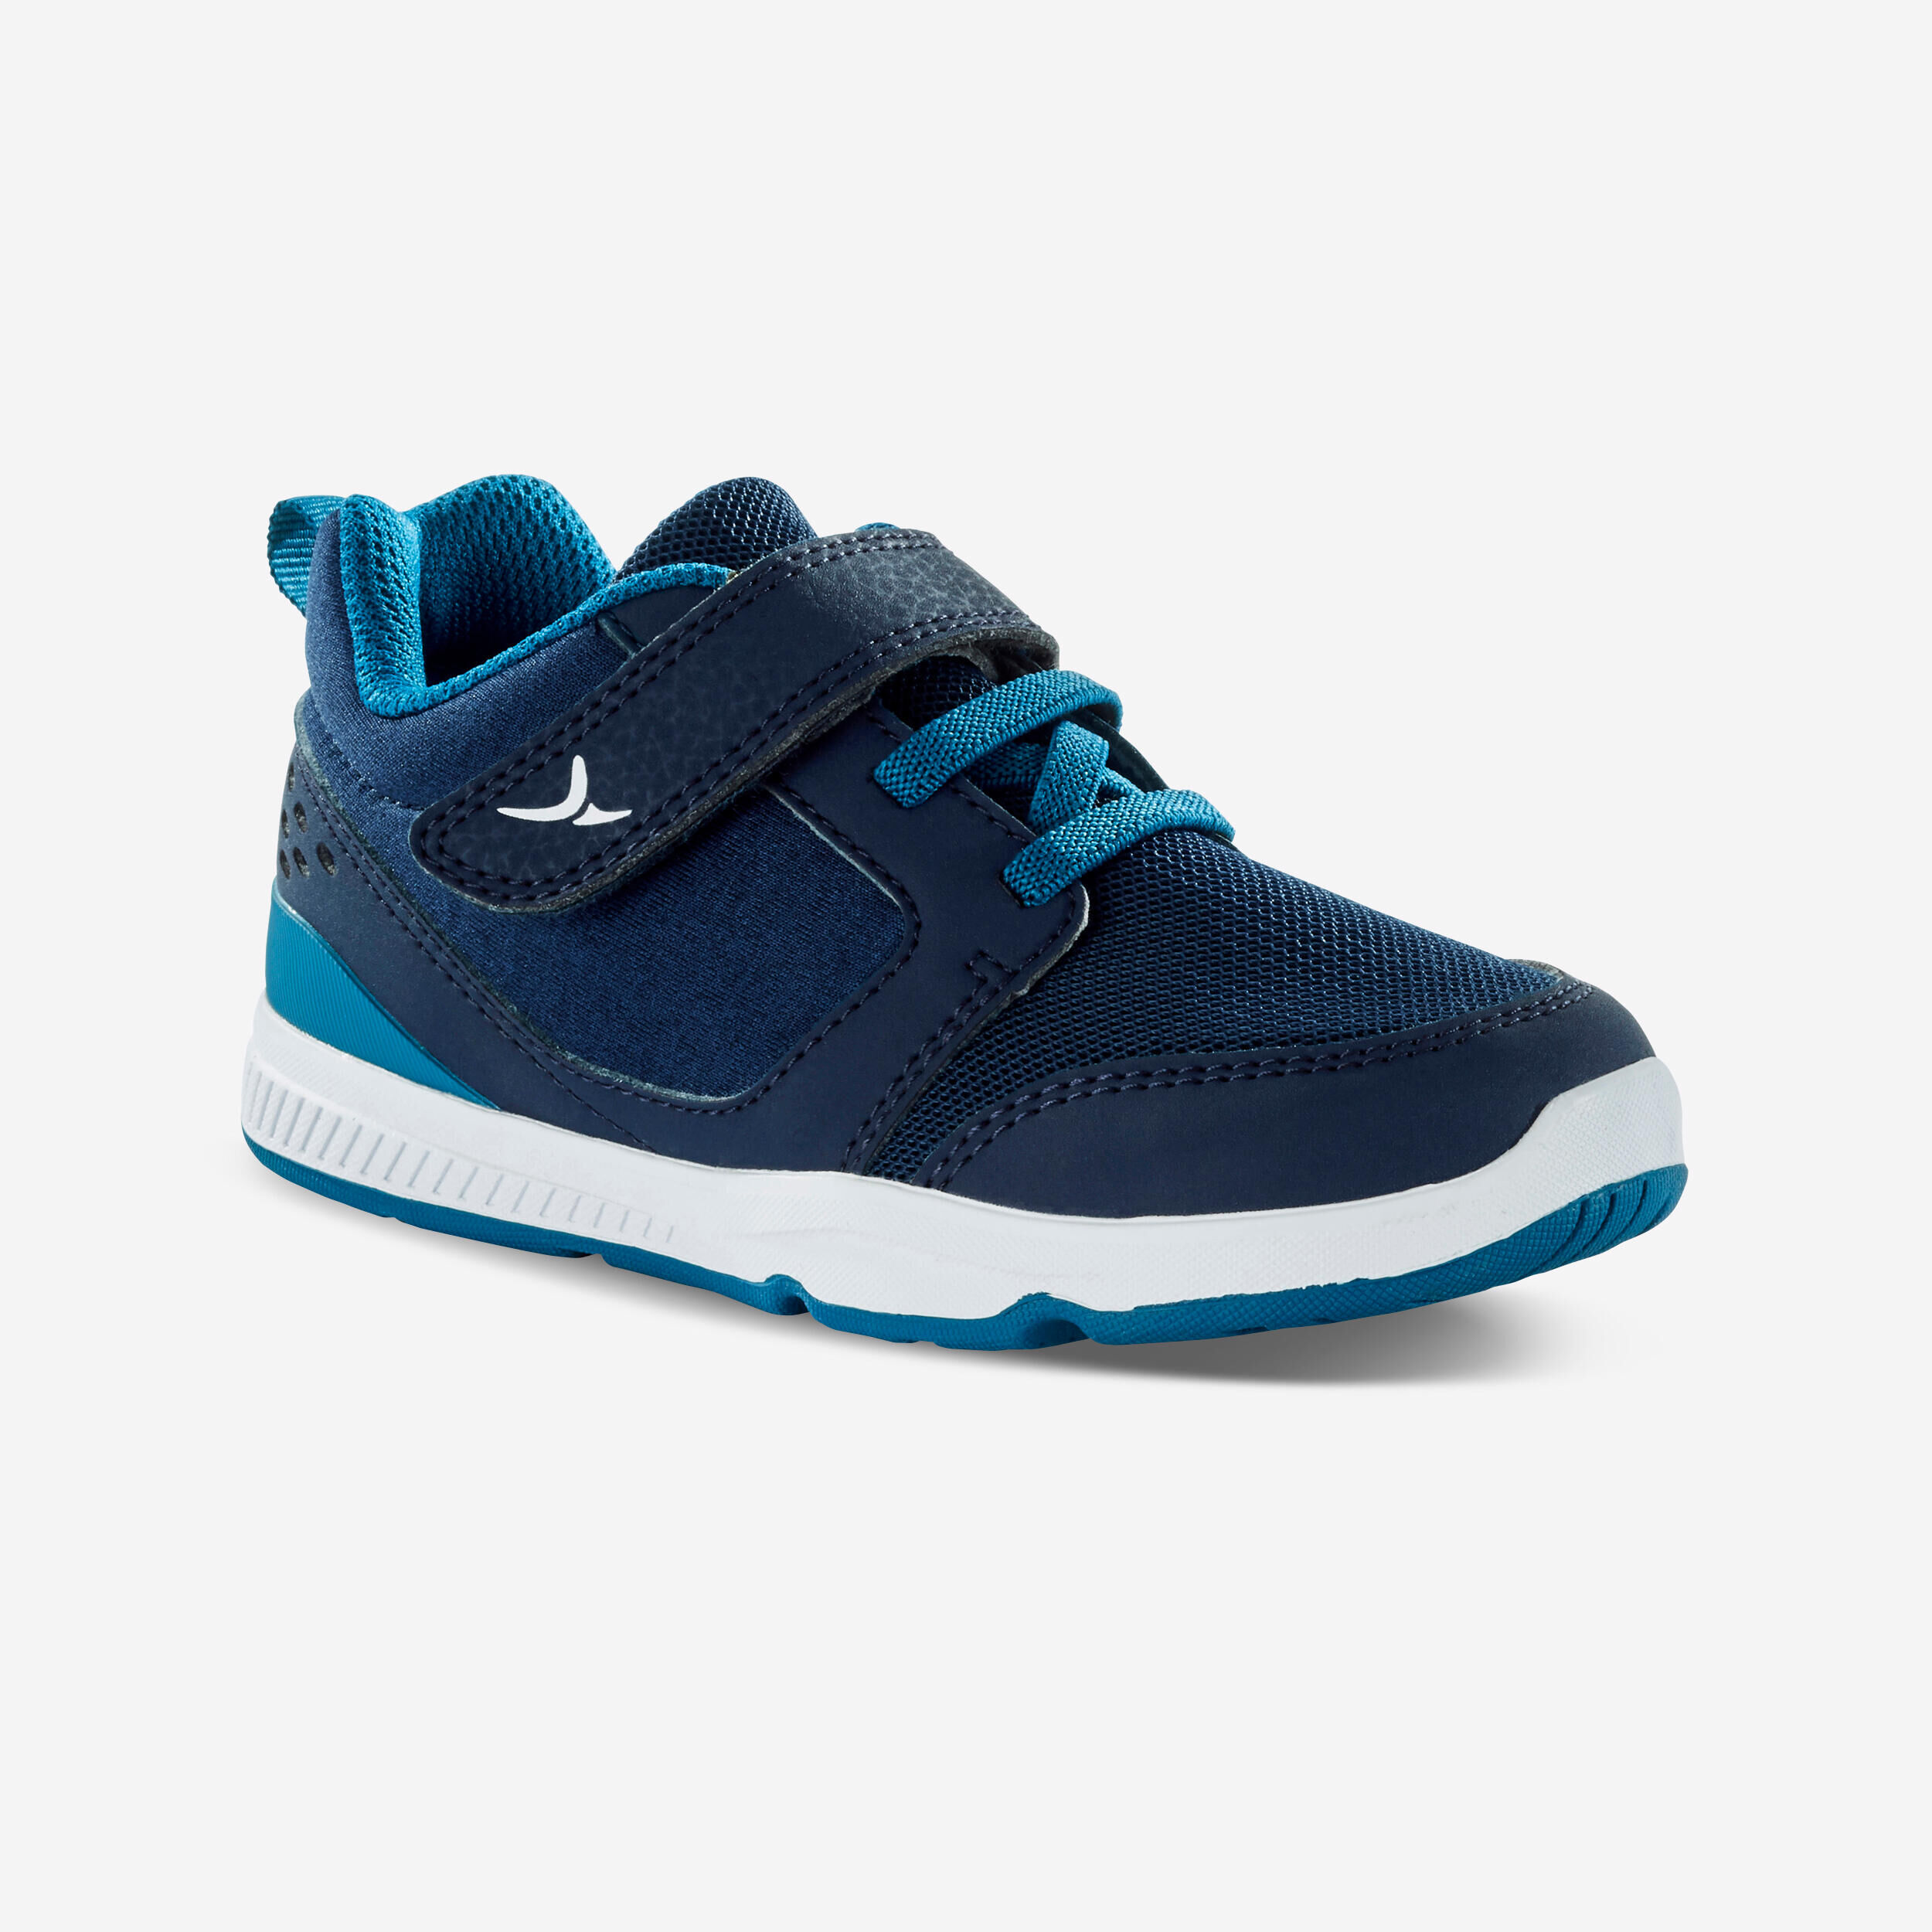 DOMYOS Kids' Shoes Size 8 to 11 550 I Move - Navy Blue